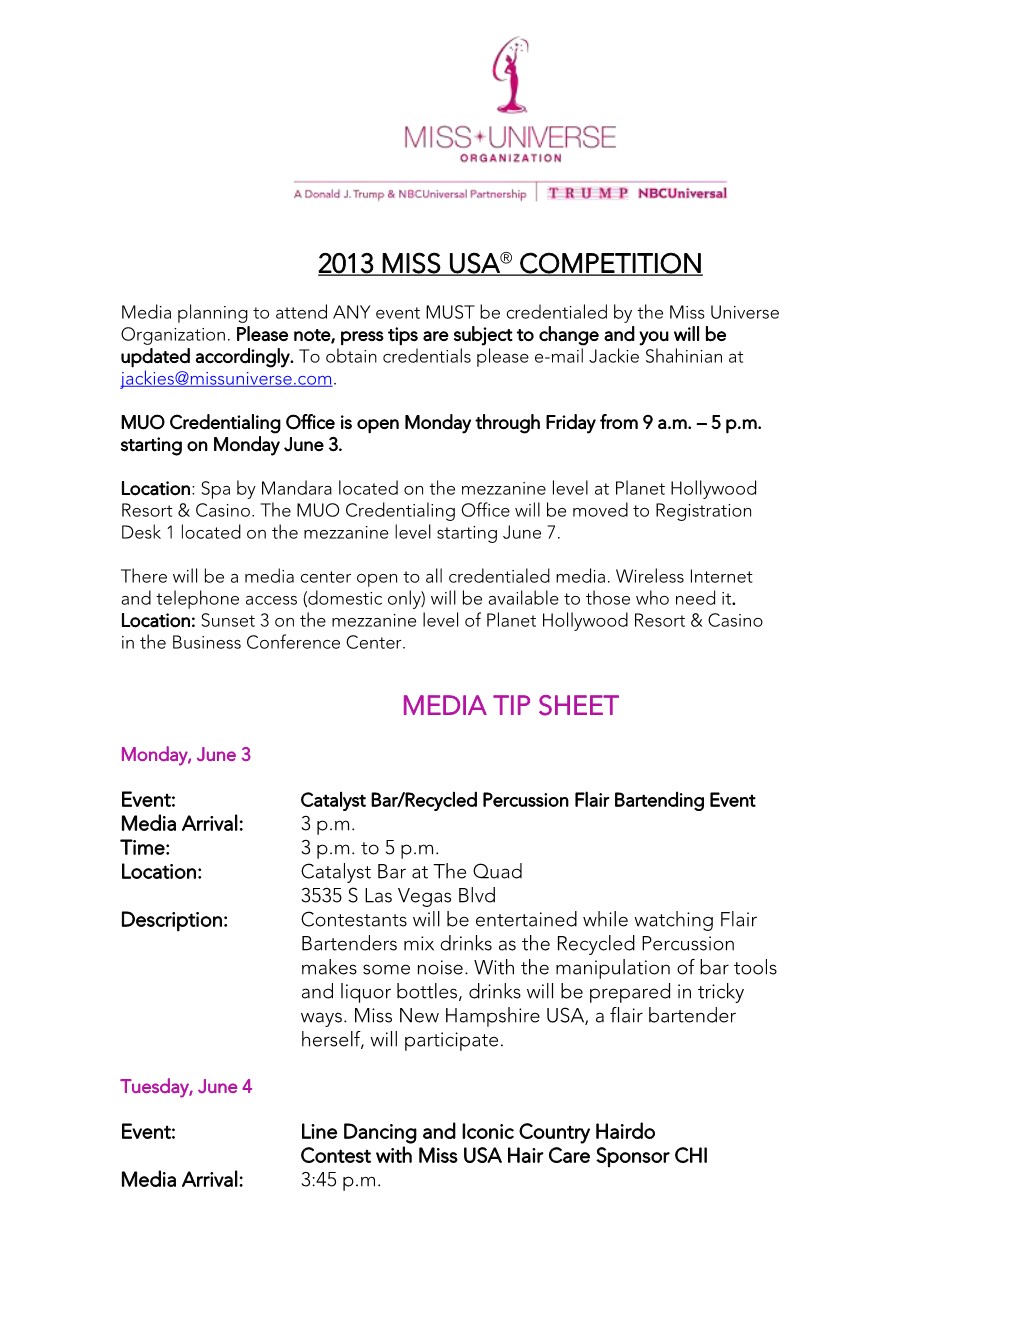 2013 Miss Usa® Competition Media Tip Sheet